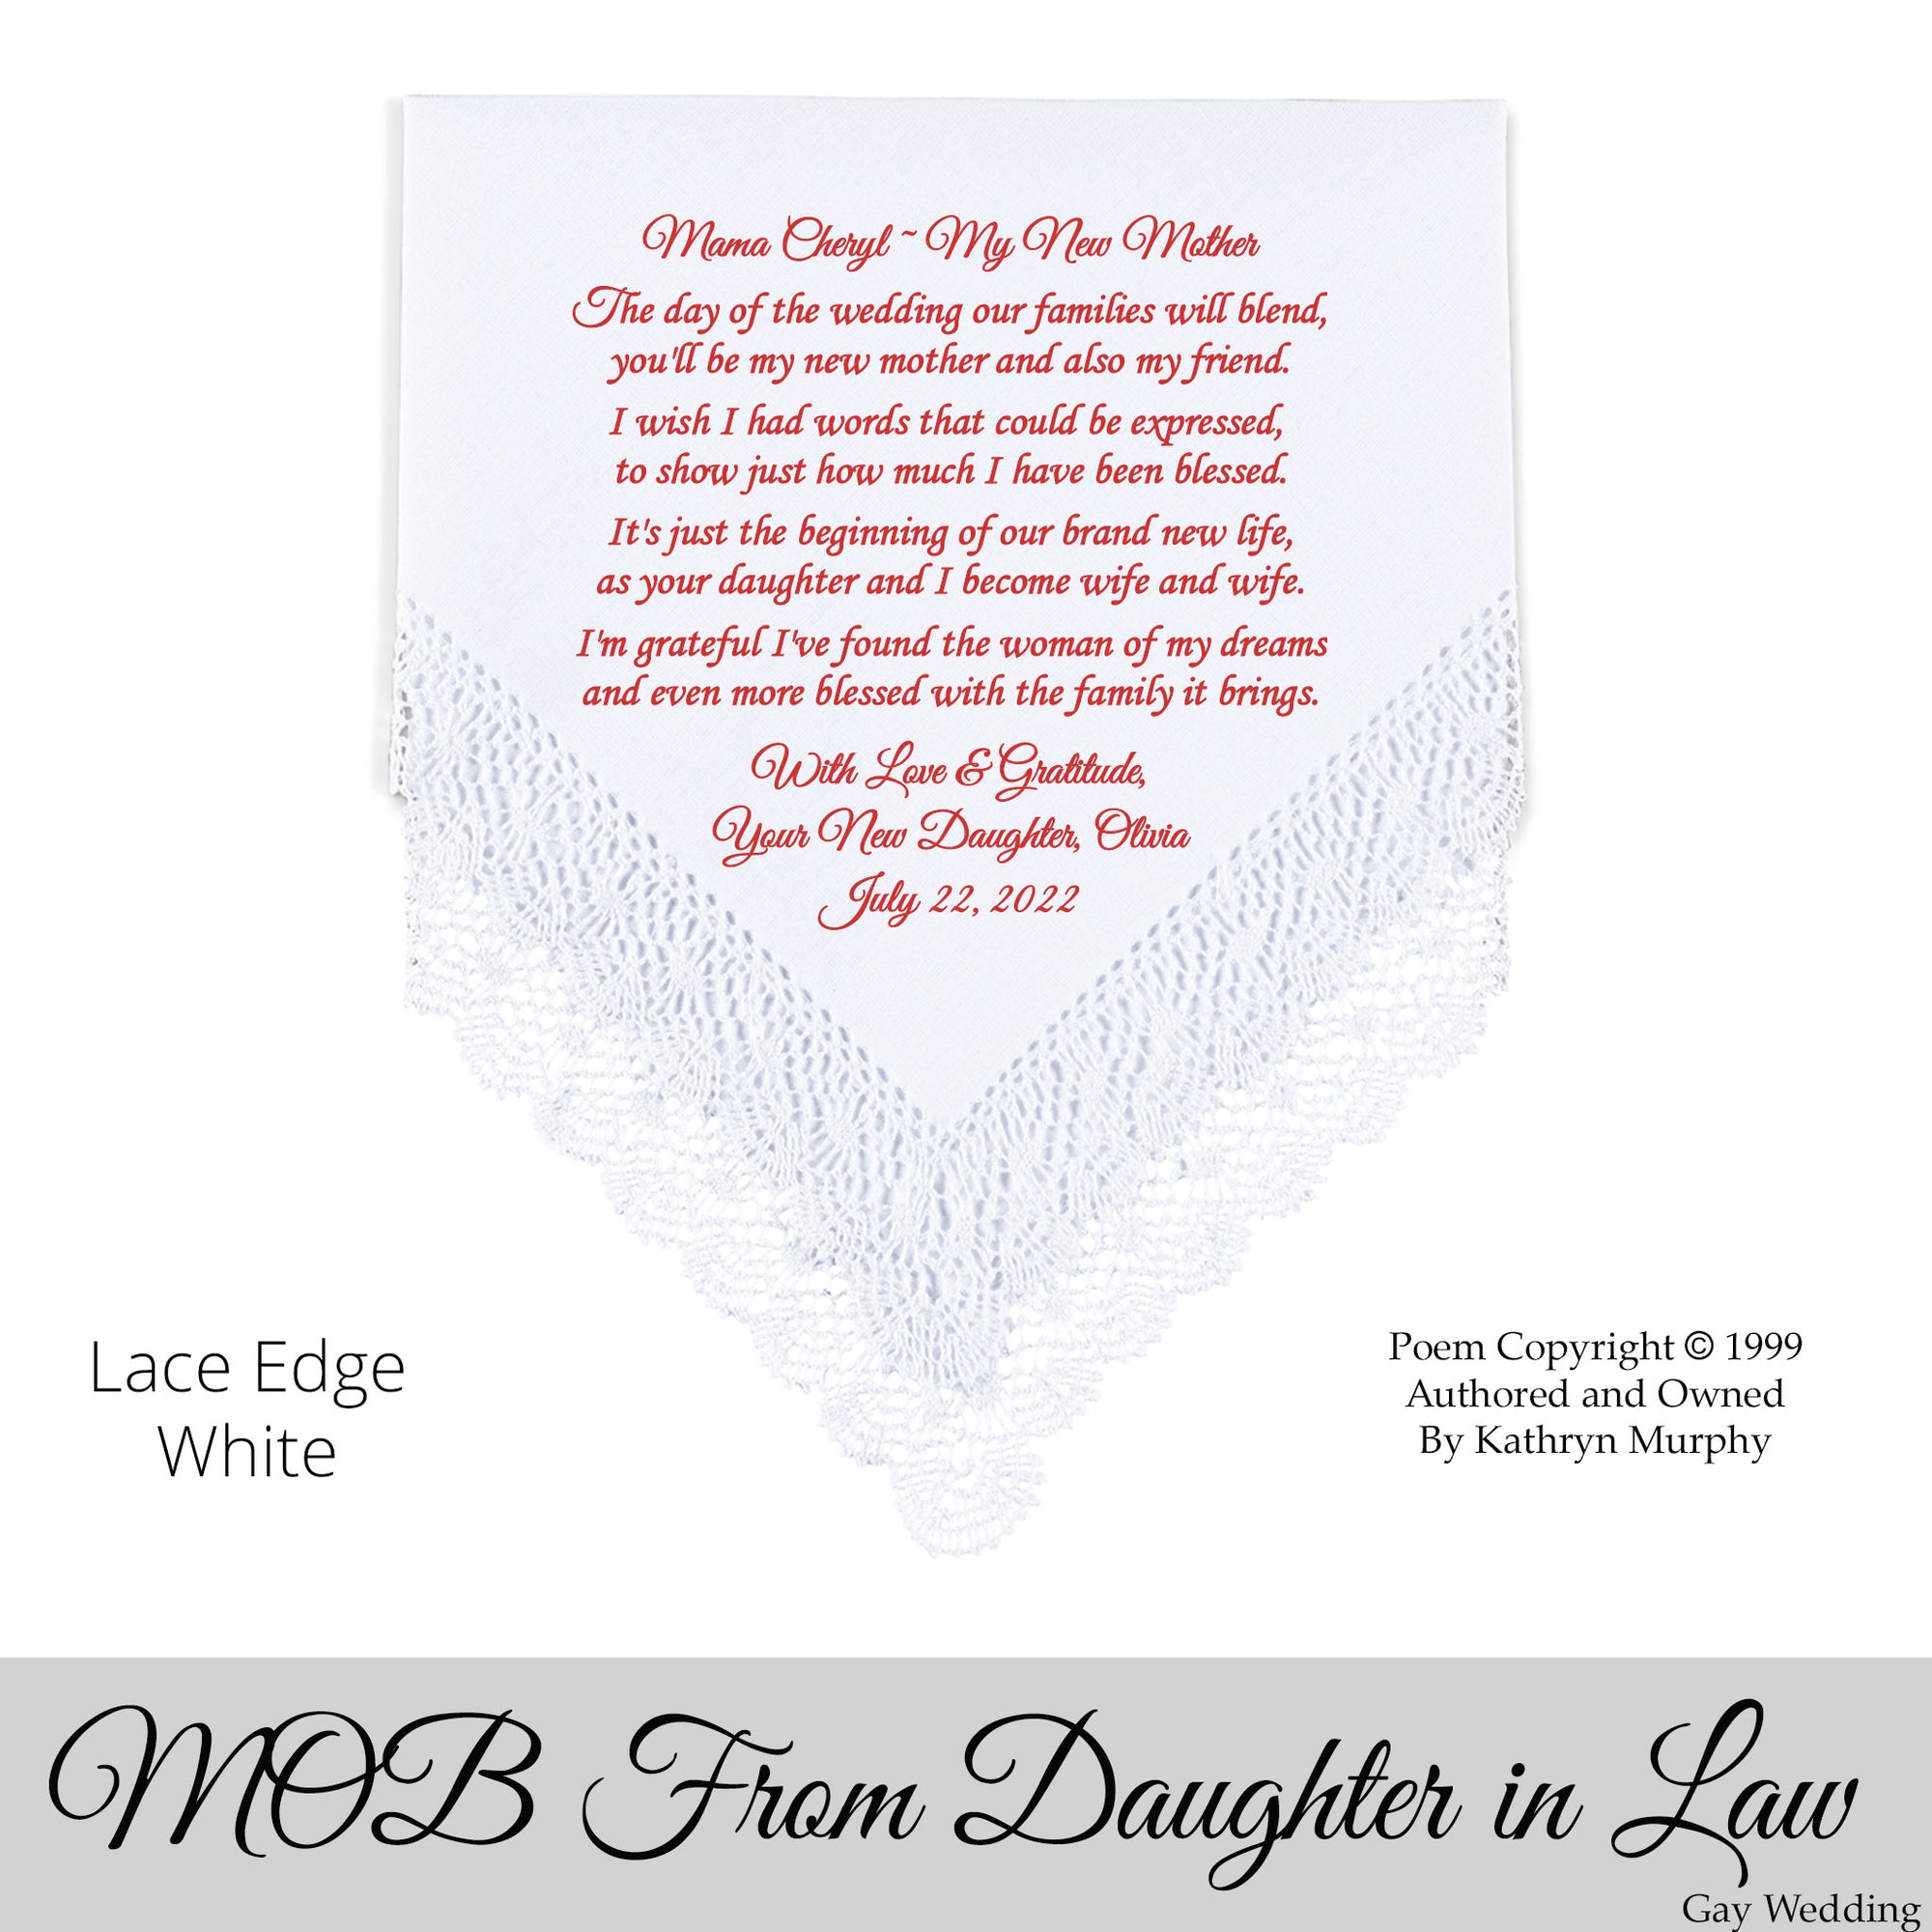 Gay Wedding Gift for the Mother of the Bride poem printed wedding hankie